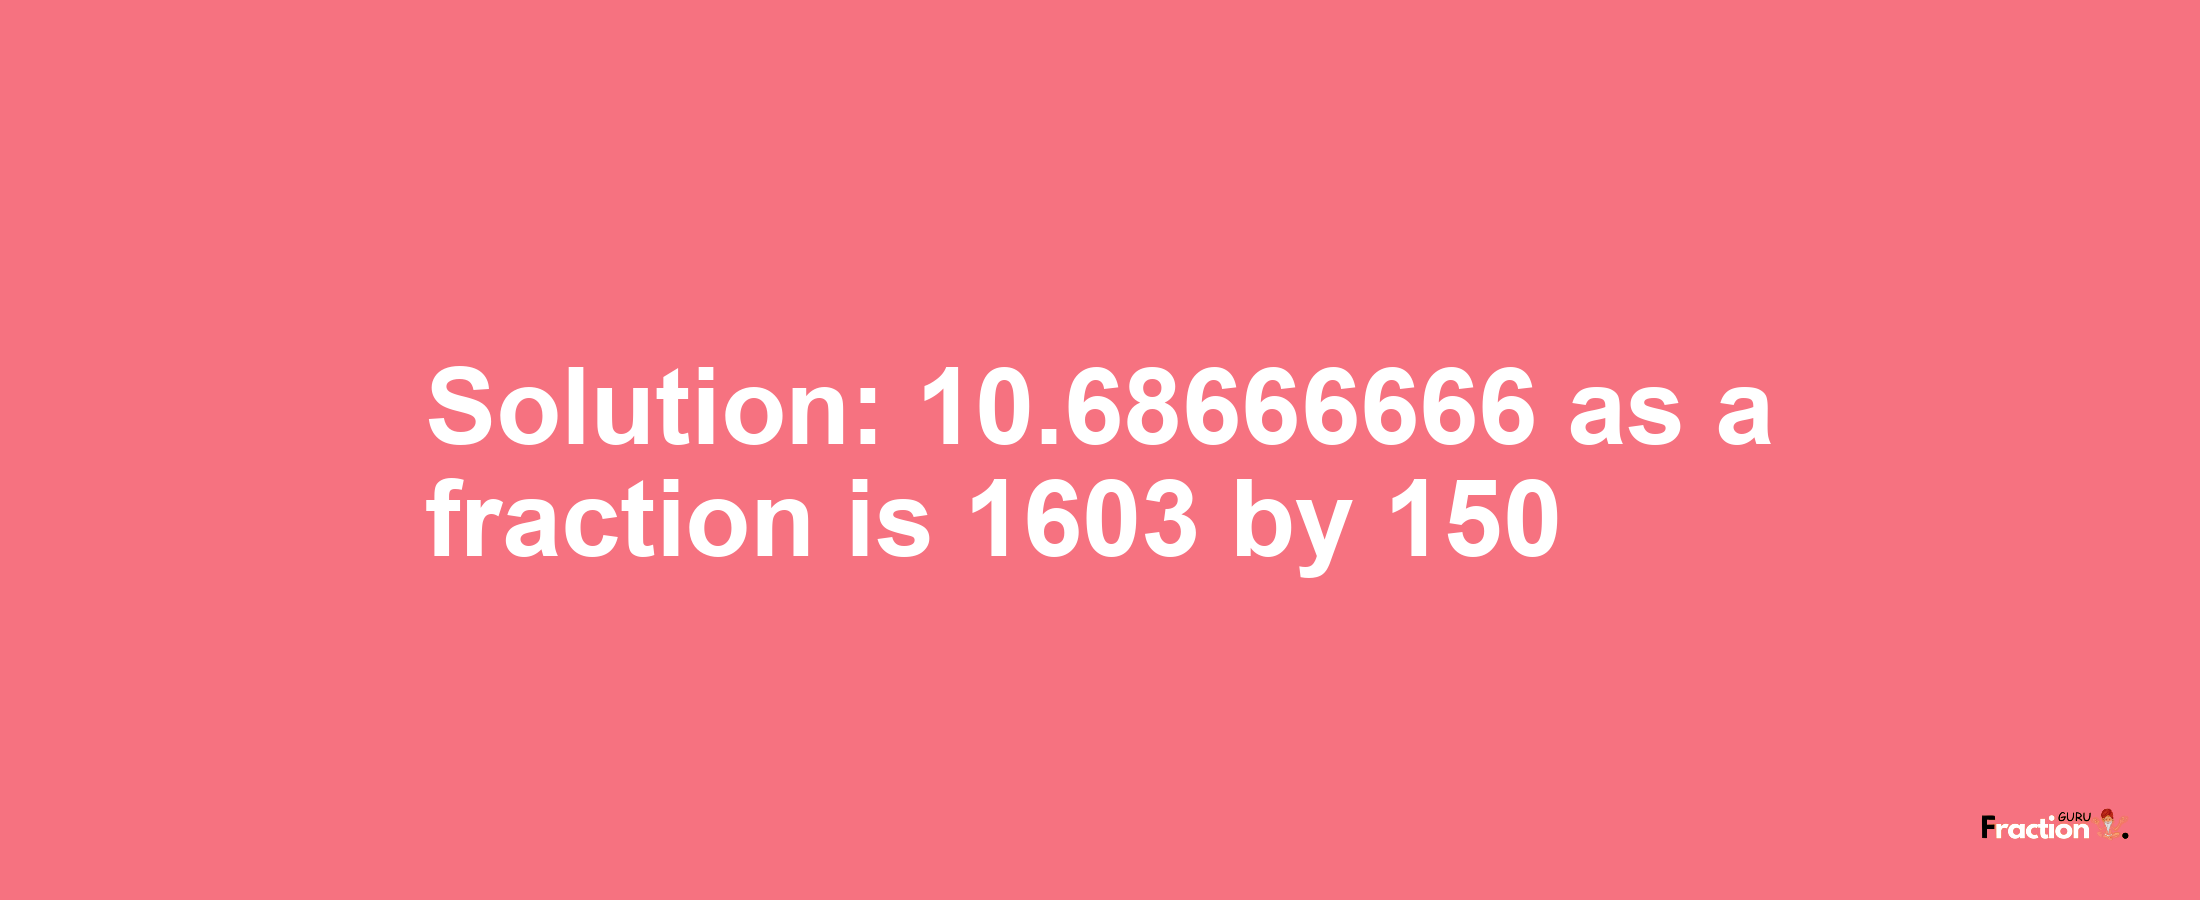 Solution:10.68666666 as a fraction is 1603/150